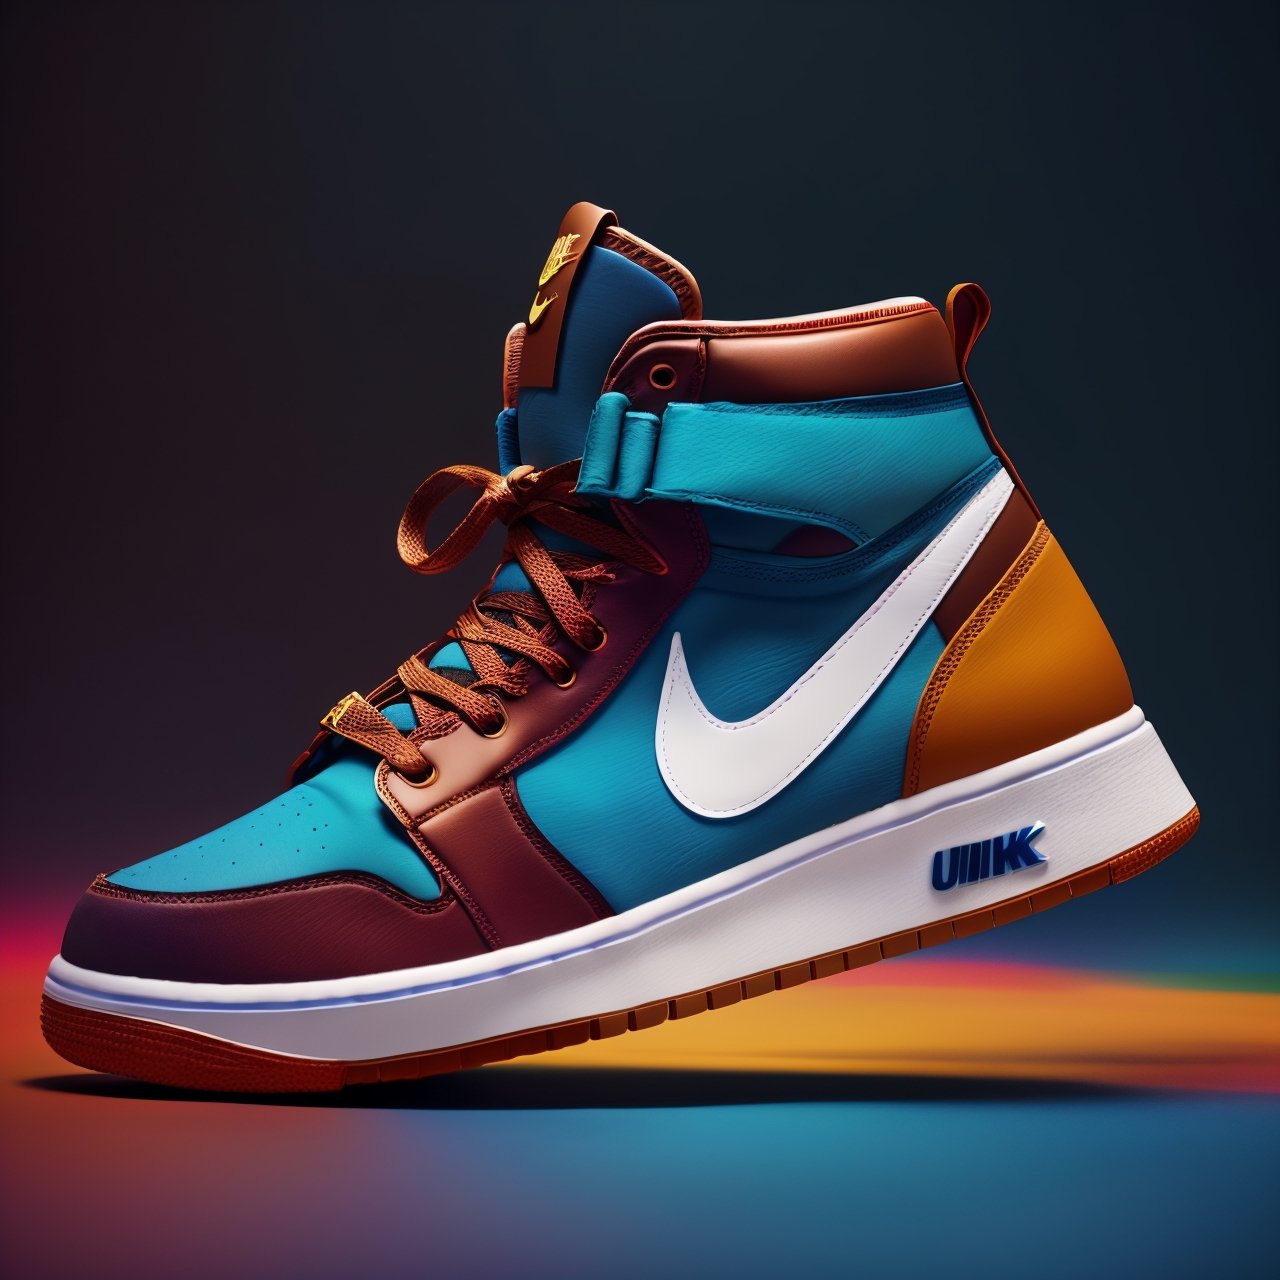 (Create a concept design through studio photography),(Showcasing sneakers with a unique and eye-catching design, inspired by Vietnam flag),(in a commercial style),(placed against a bold blue background),(Render it in a cinematic, photorealistic manner),(ensuring it's available in an impressive 8K resolution).